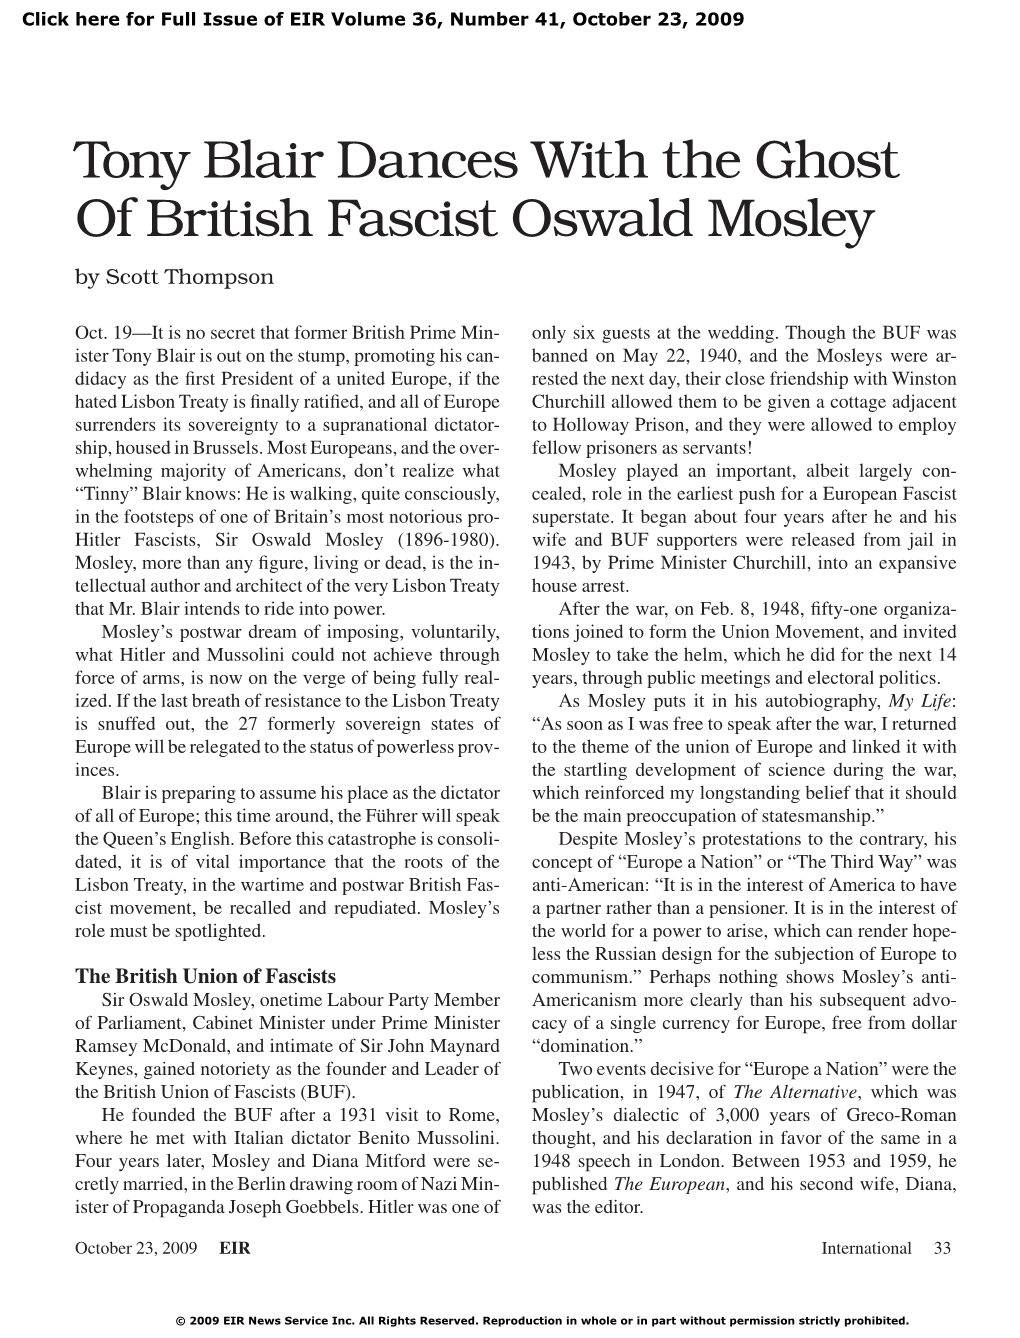 Tony Blair Dances with the Ghost of British Fascist Oswald Mosley by Scott Thompson